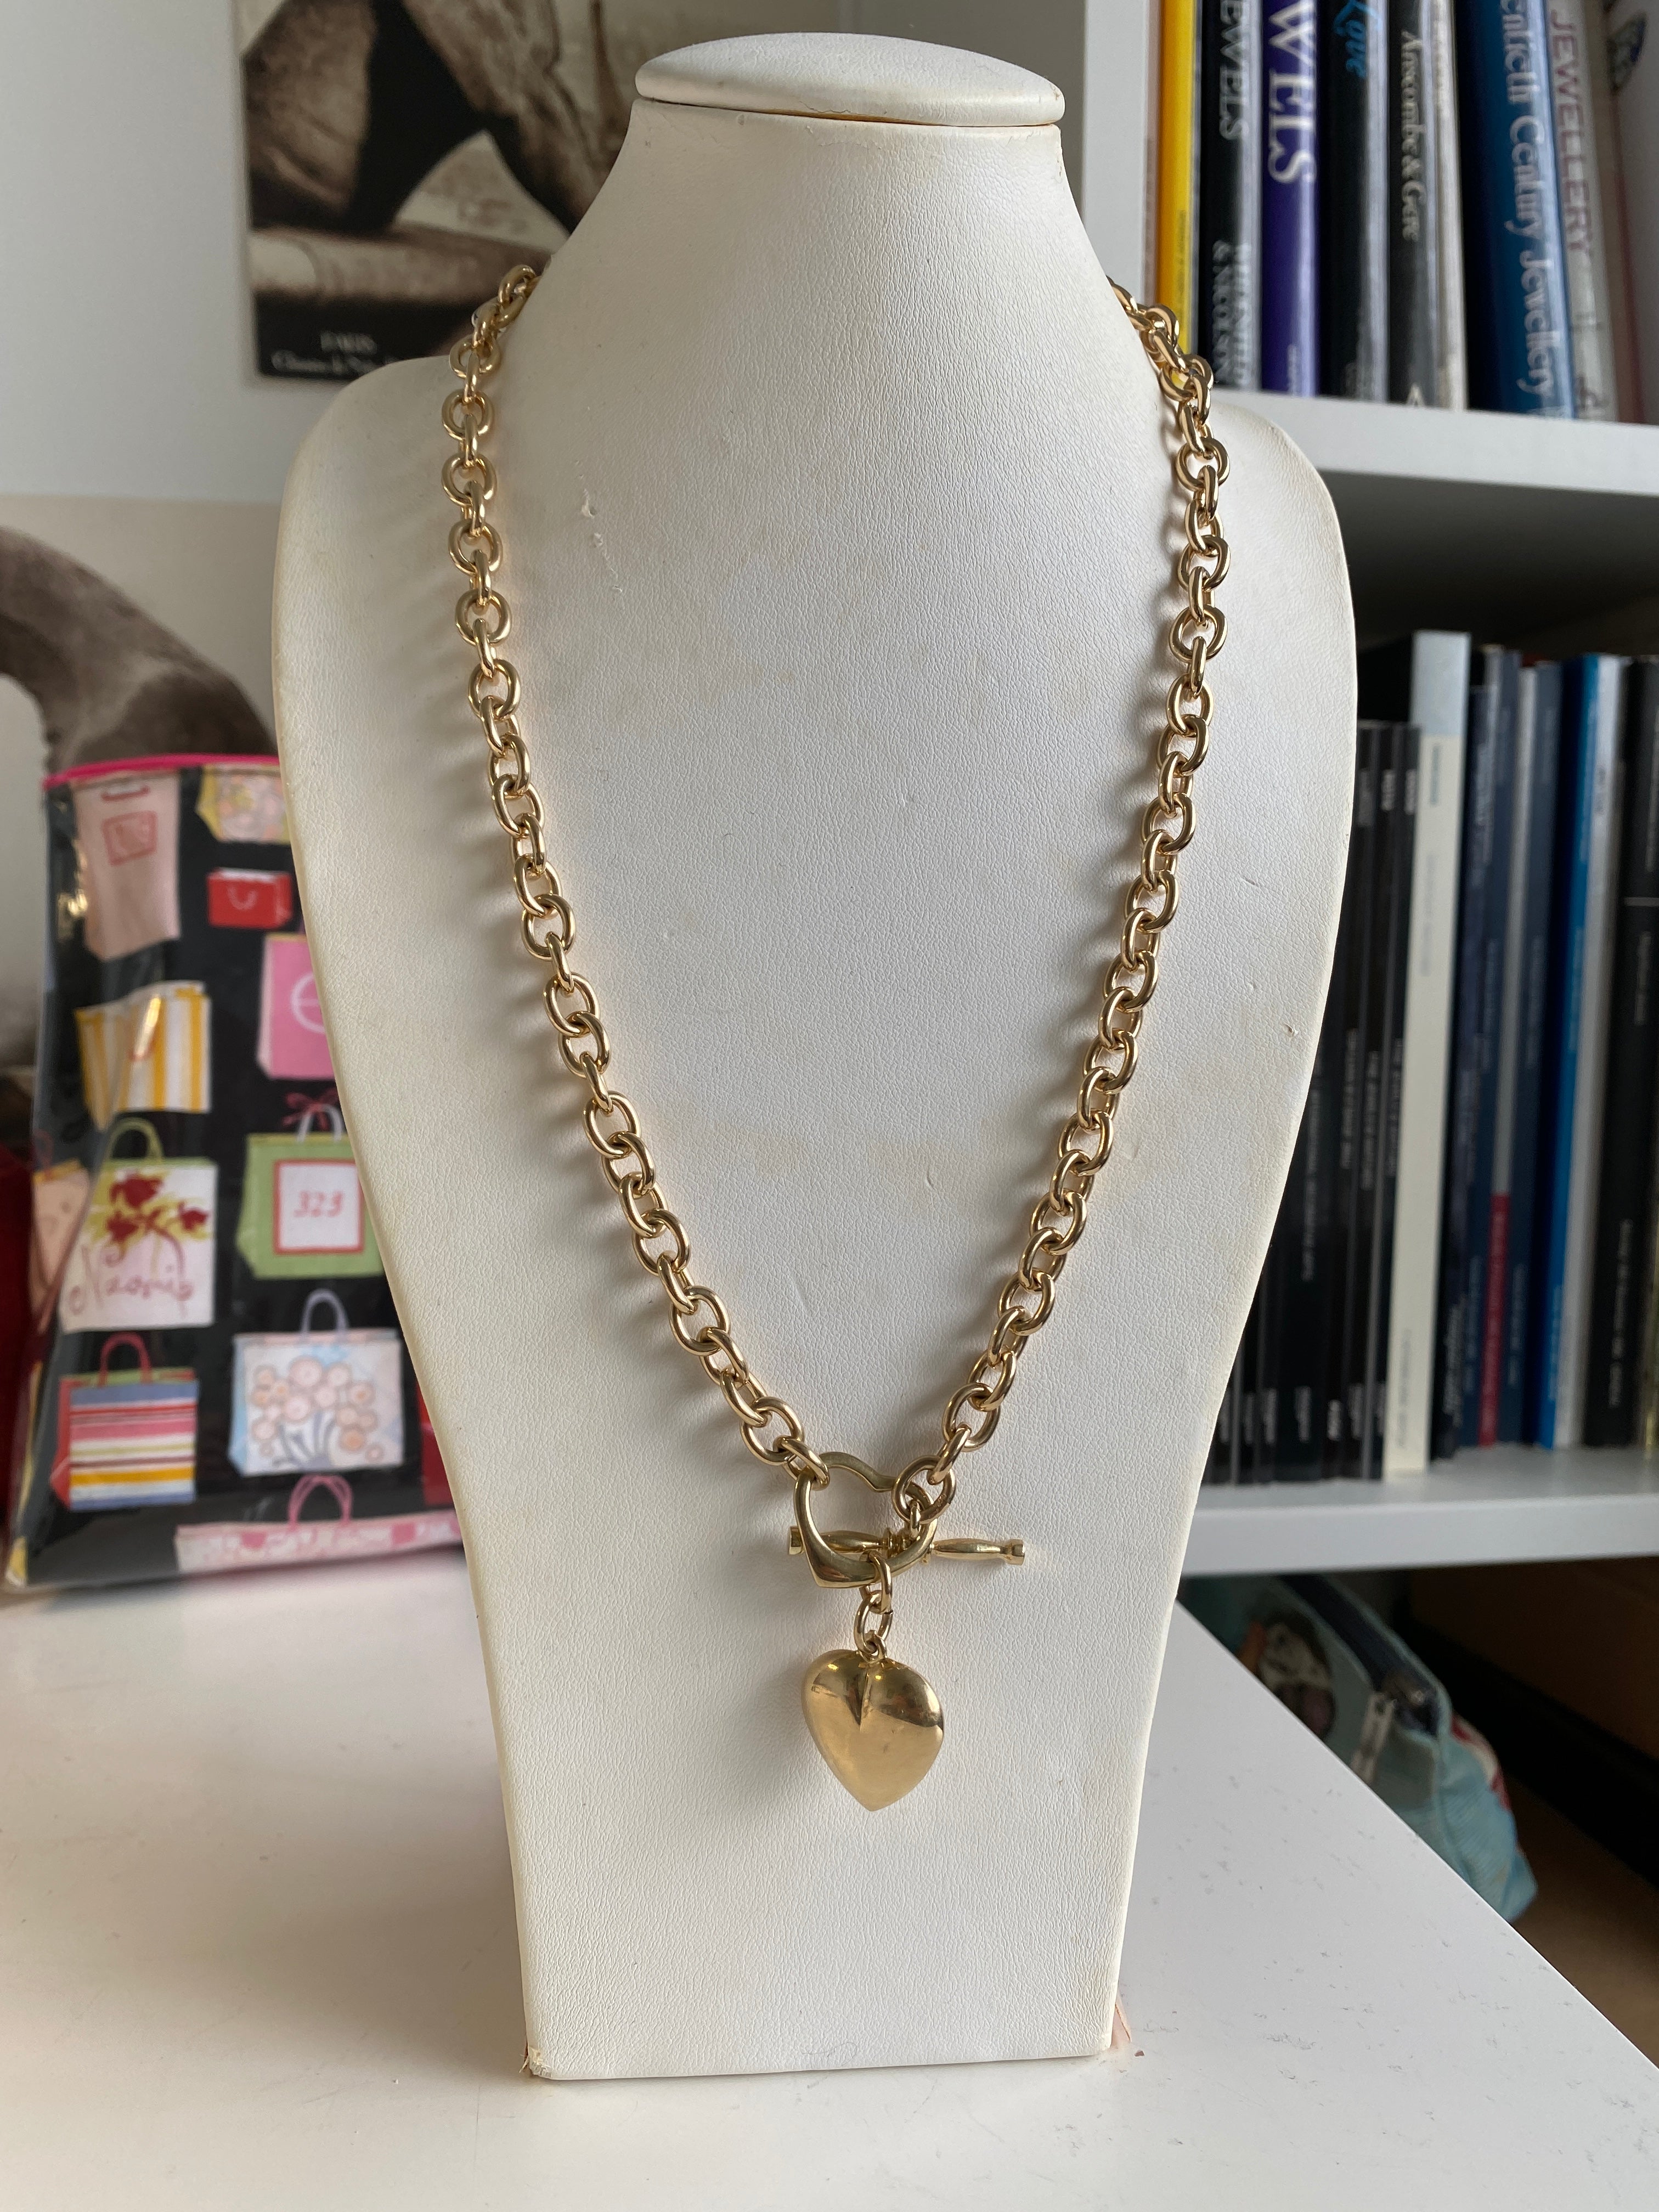 Vintage Gold Necklace with heart clasp and charm